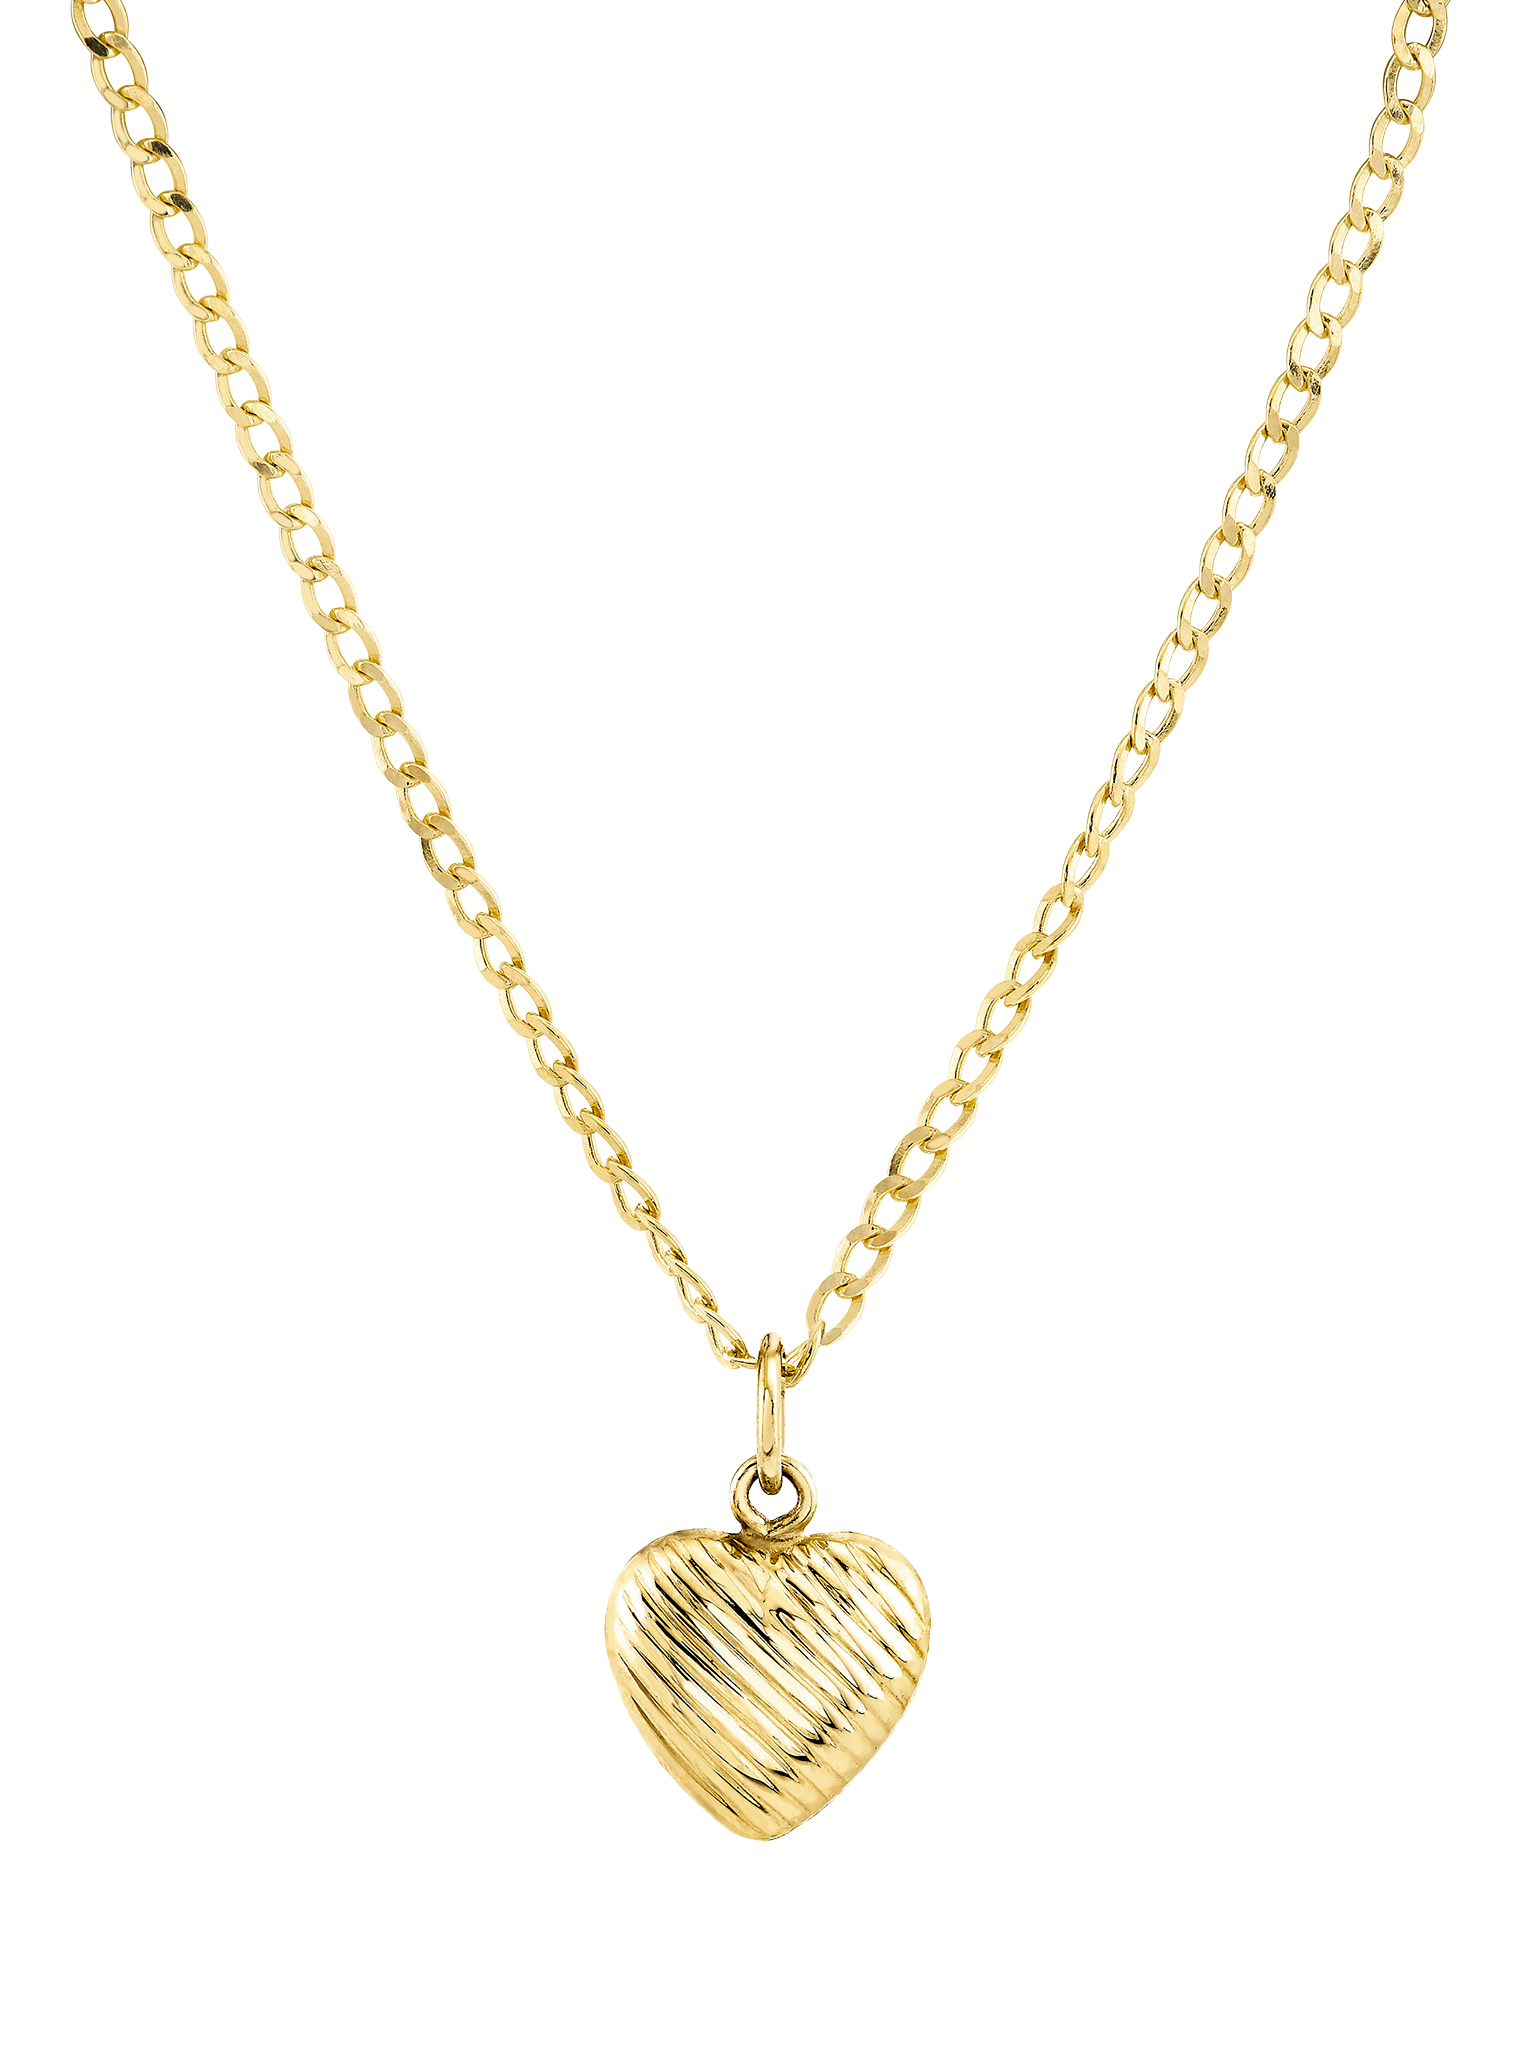 Etched helium heart charm necklace